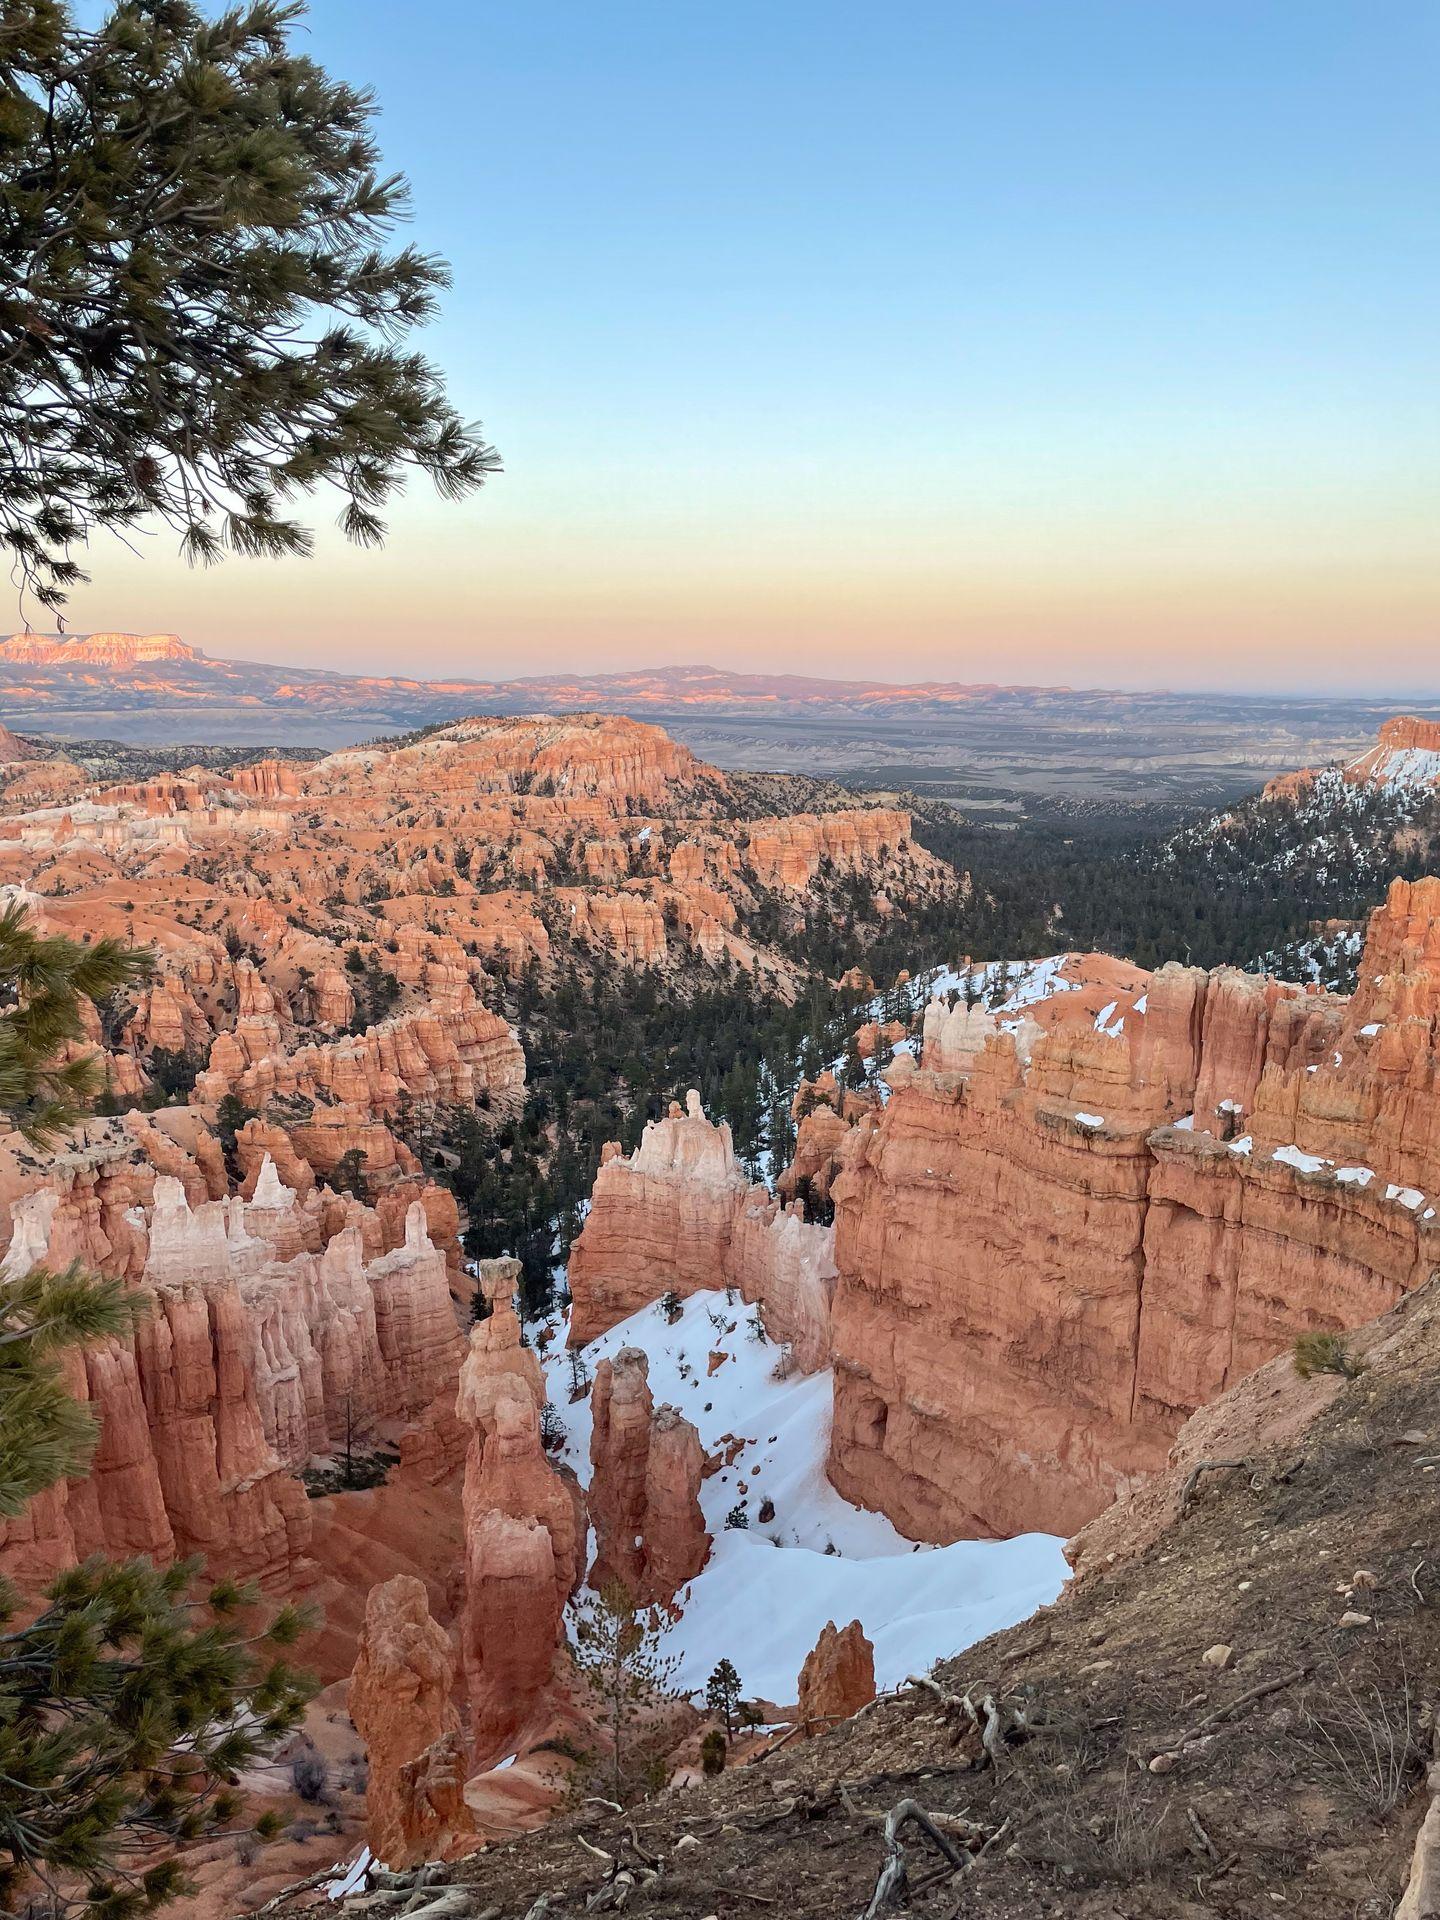 A view of the hoodoos at sunset from Sunset Point